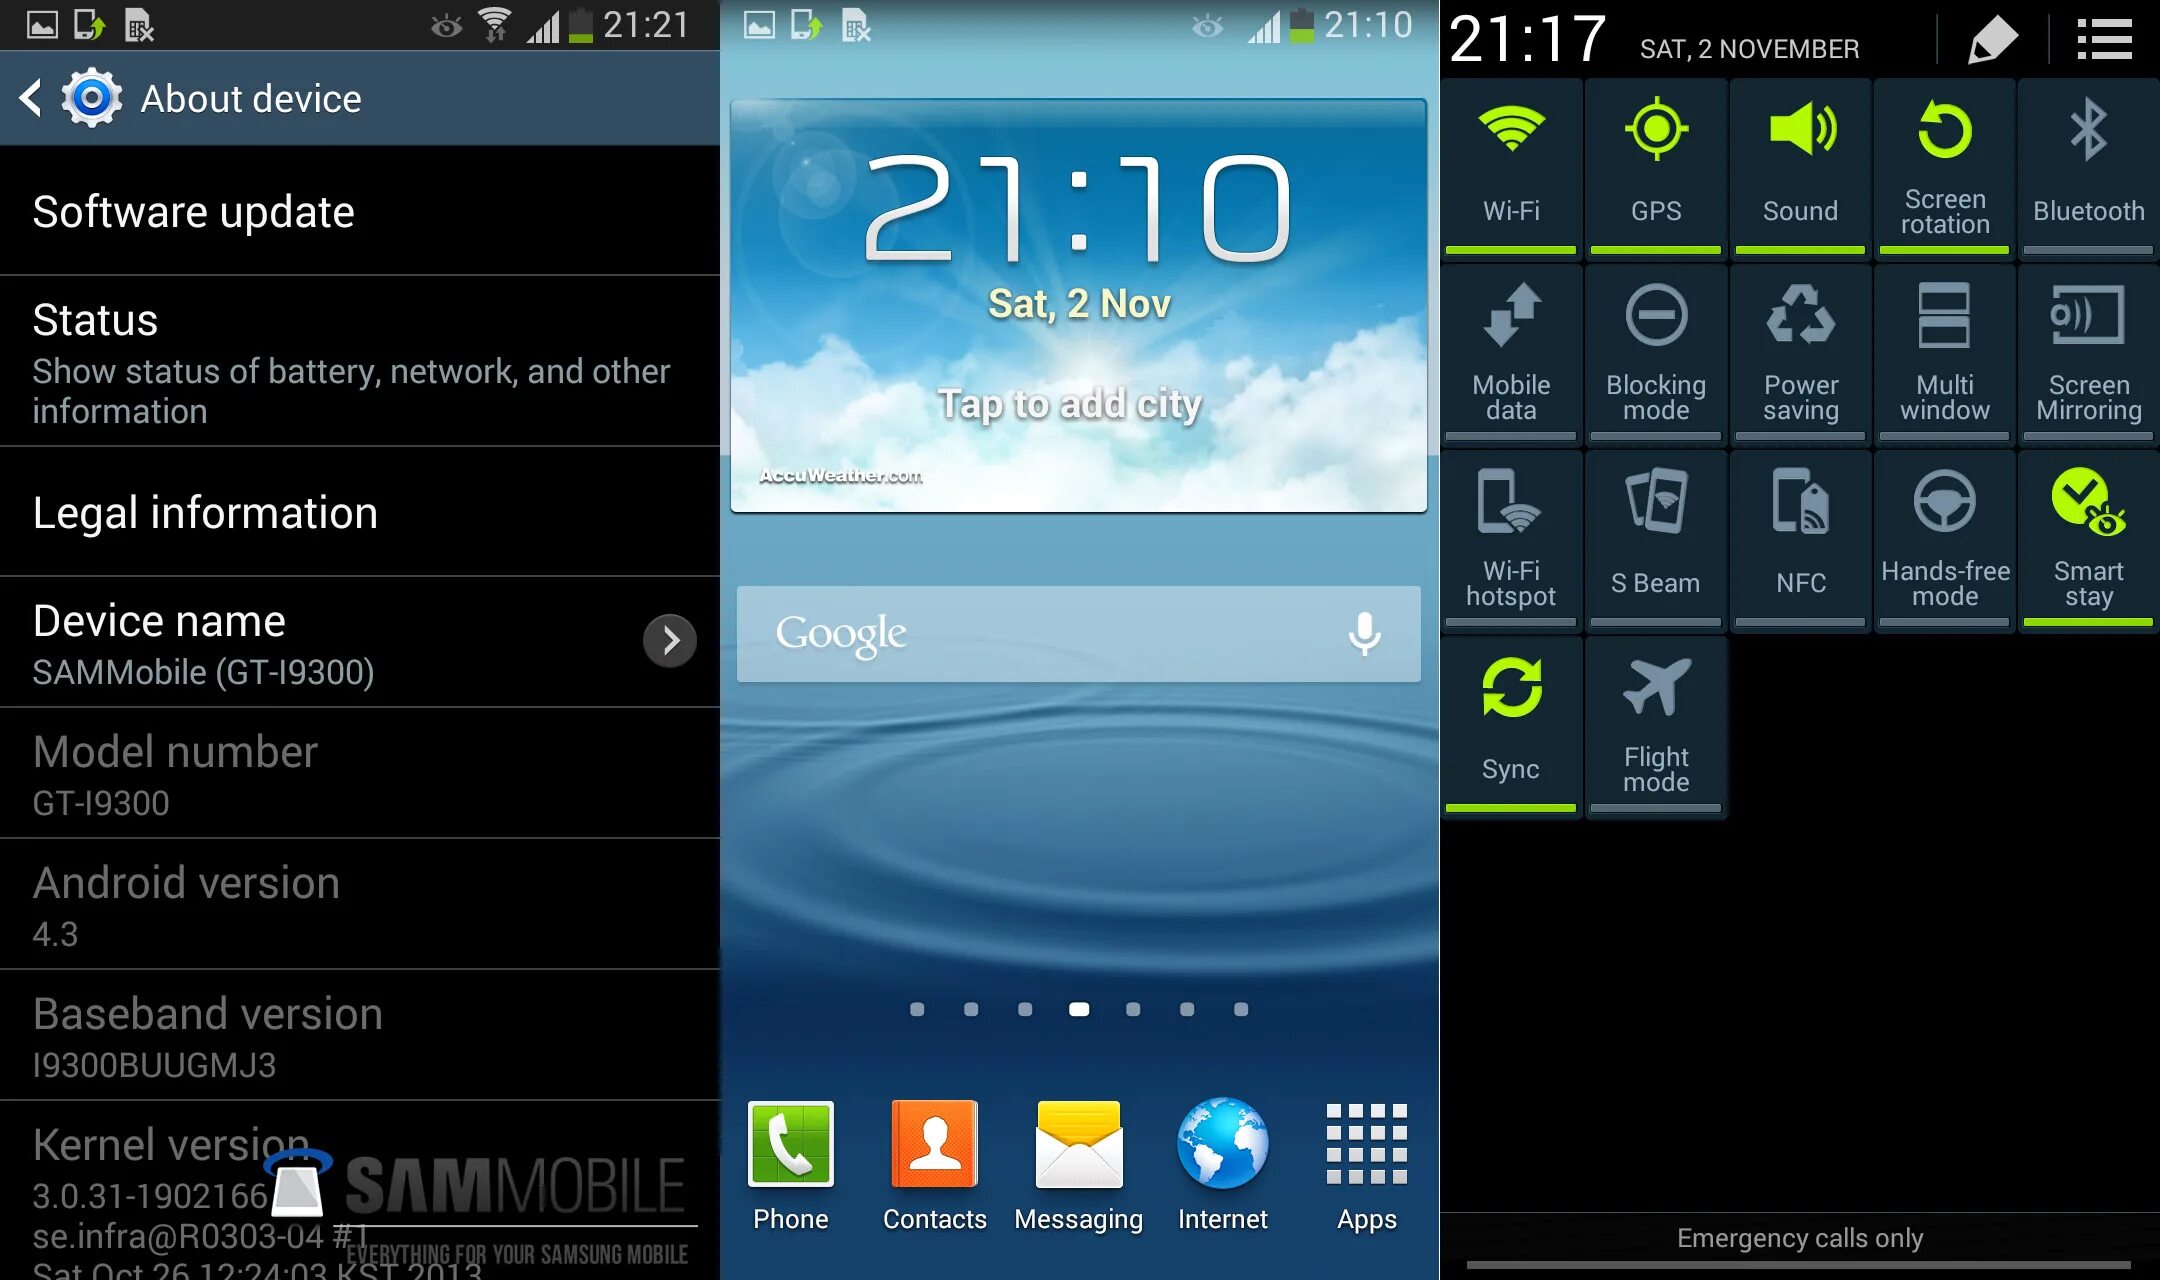 Samsung Galaxy s2 Android 4.1. Samsung Galaxy s3 андроид 4.4. Samsung Galaxy s3 Android 4.0. Samsung Galaxy Android 4.3.